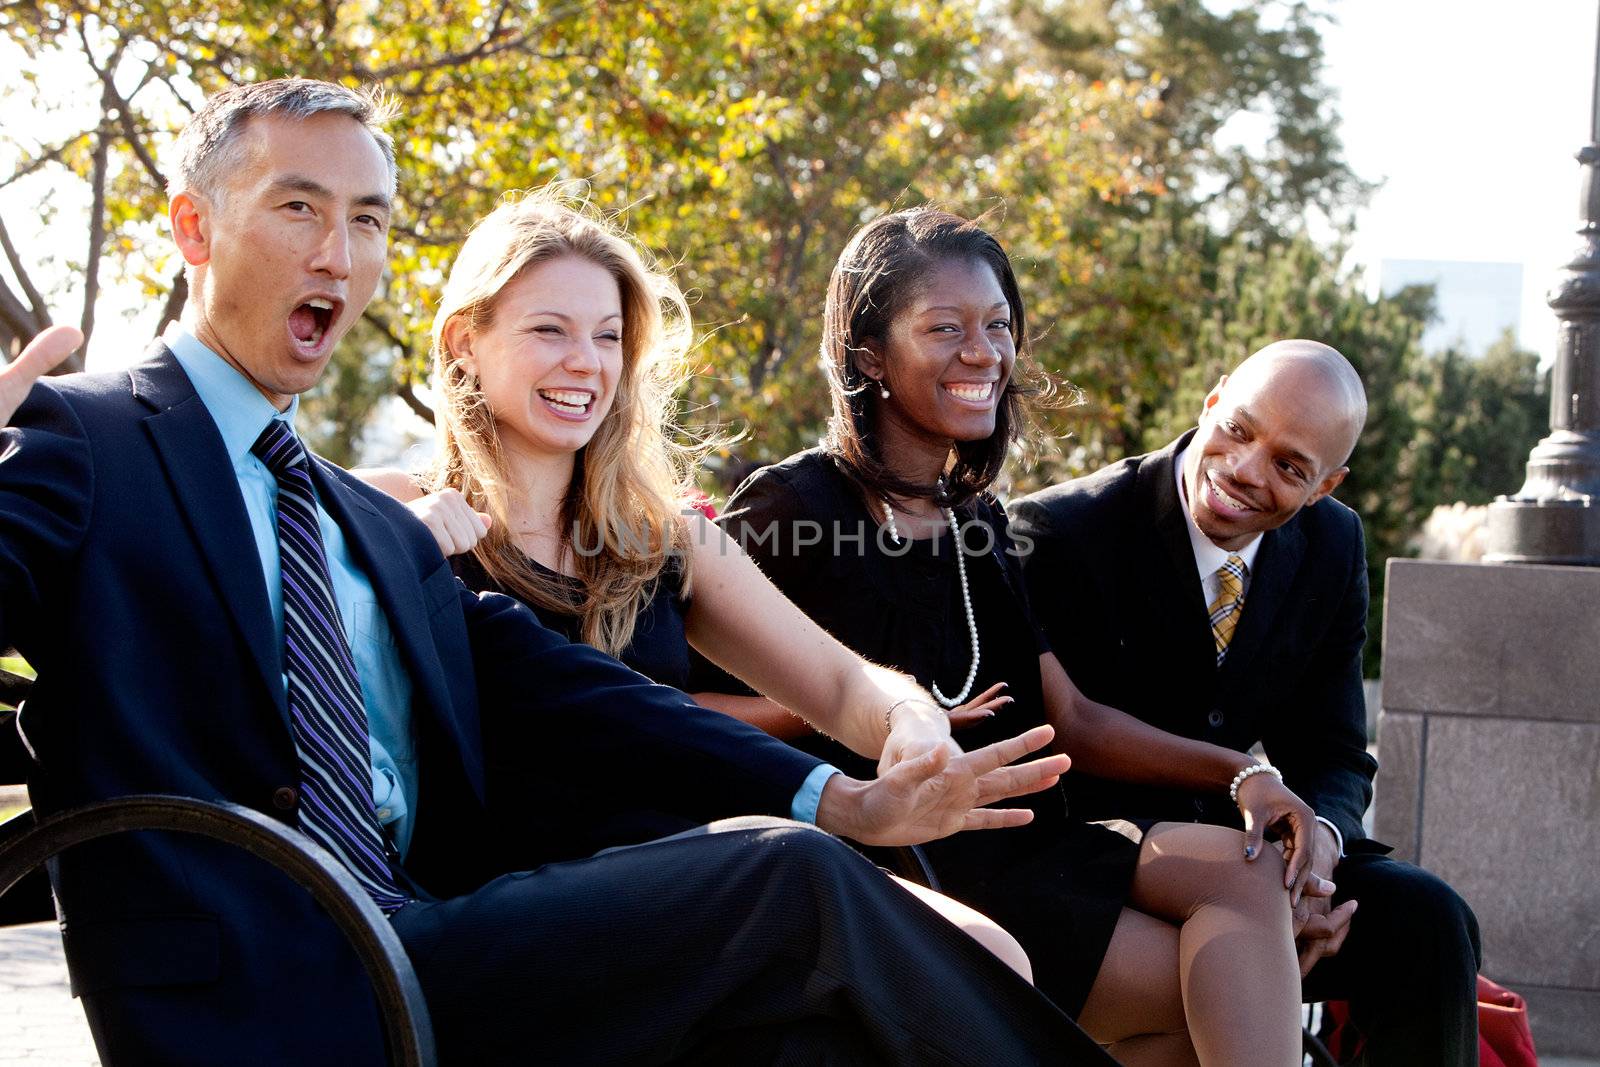 A group of business people having fun and joking